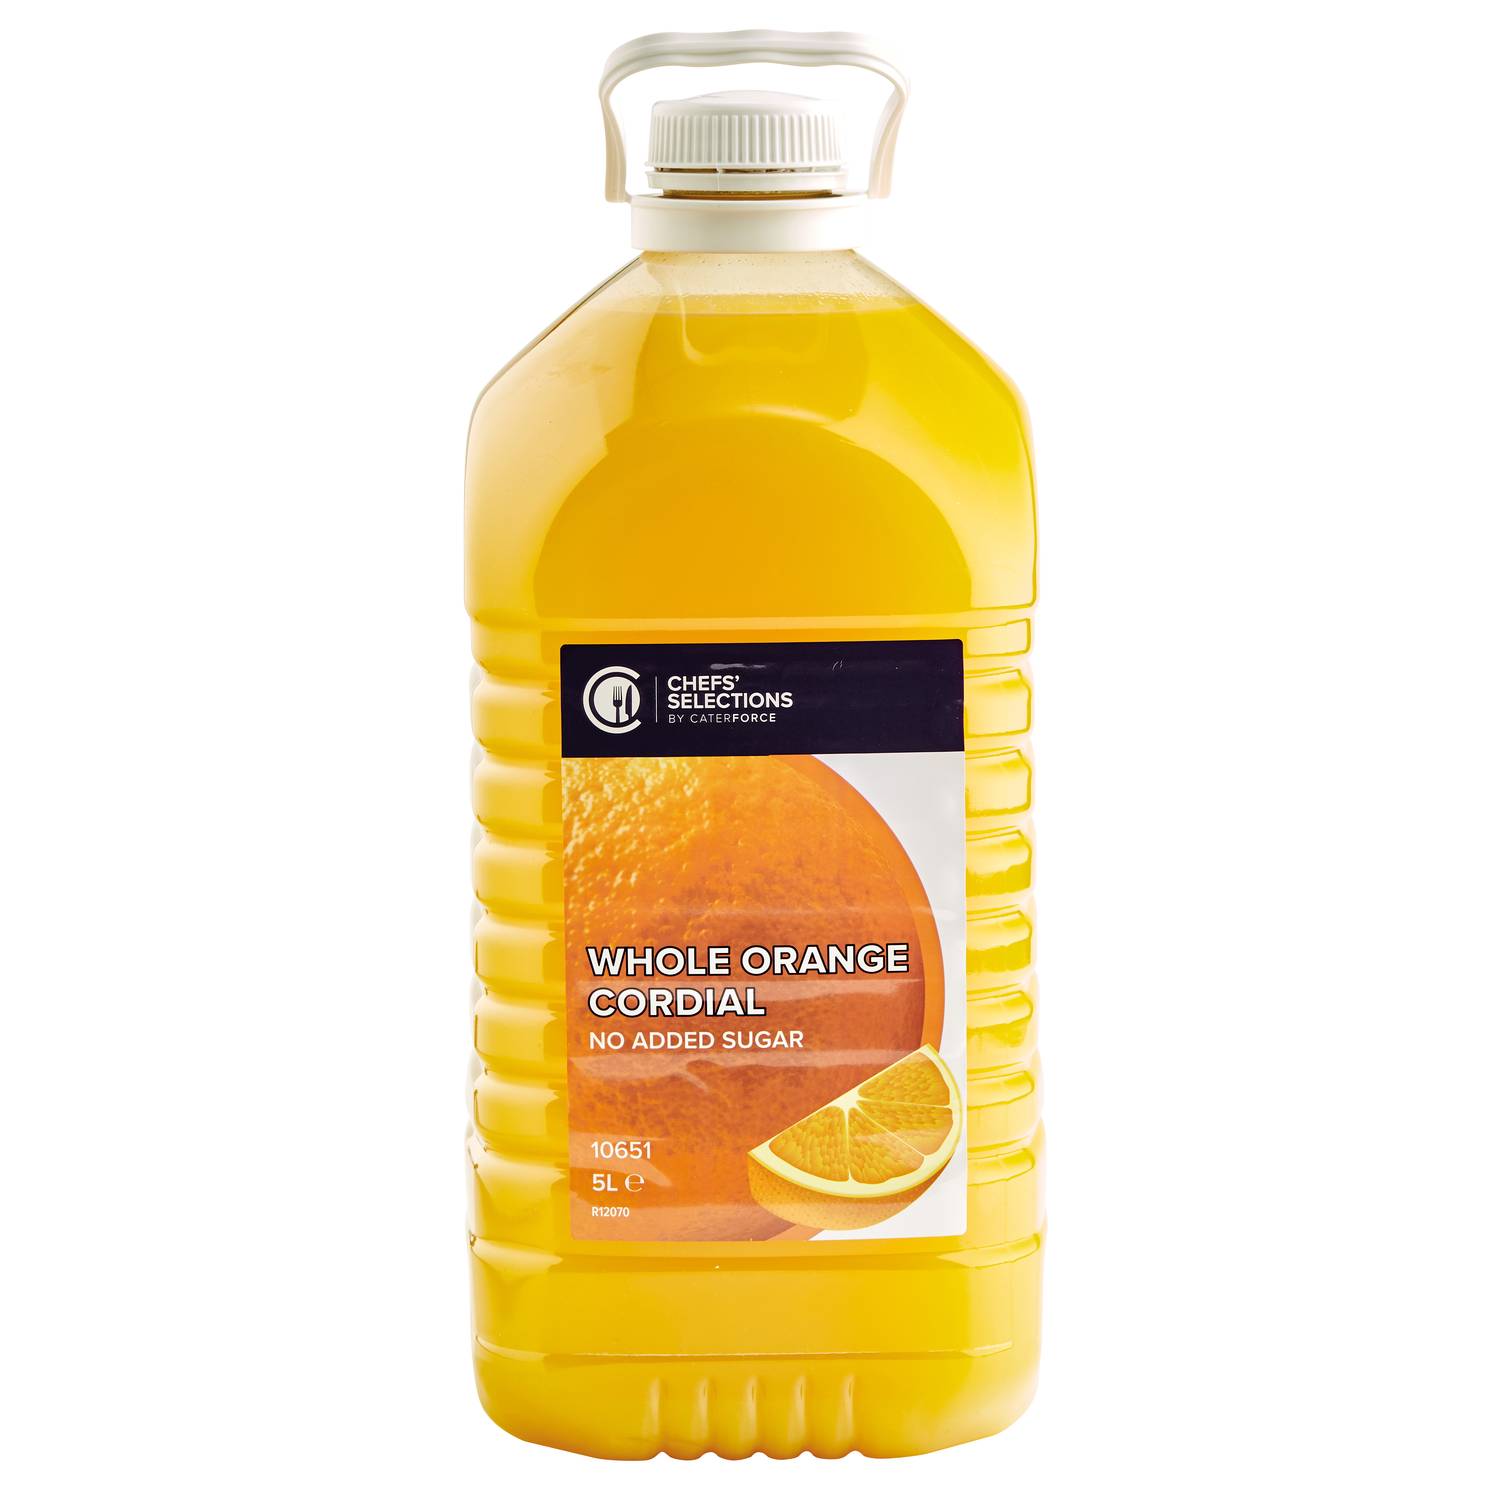 Chefs’ Selections Whole Orange Cordial No Added Sugar (2 x 5L)